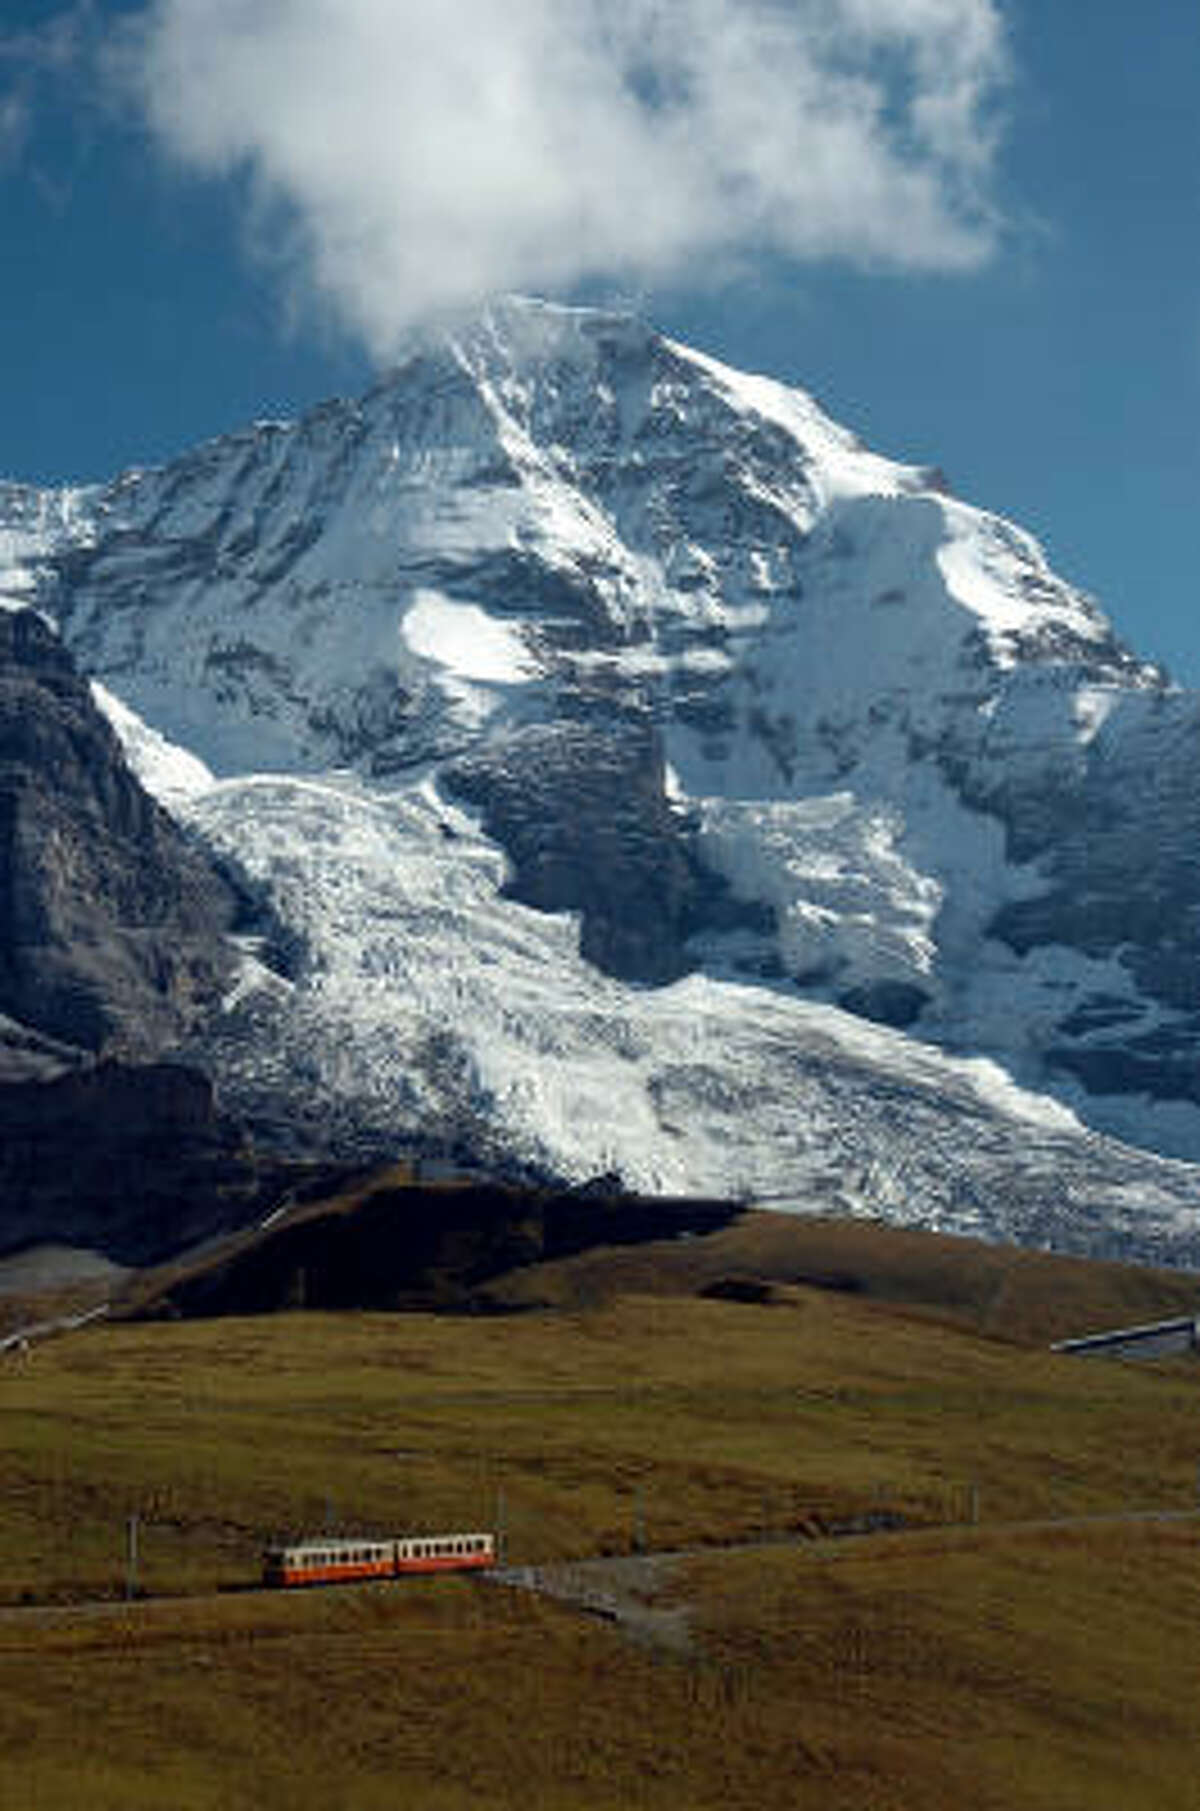 Climber John Harlin III attempts to climb the North Face of Eiger mountain in Switzerland, the site of his father's death 40 years previously in The Alps.